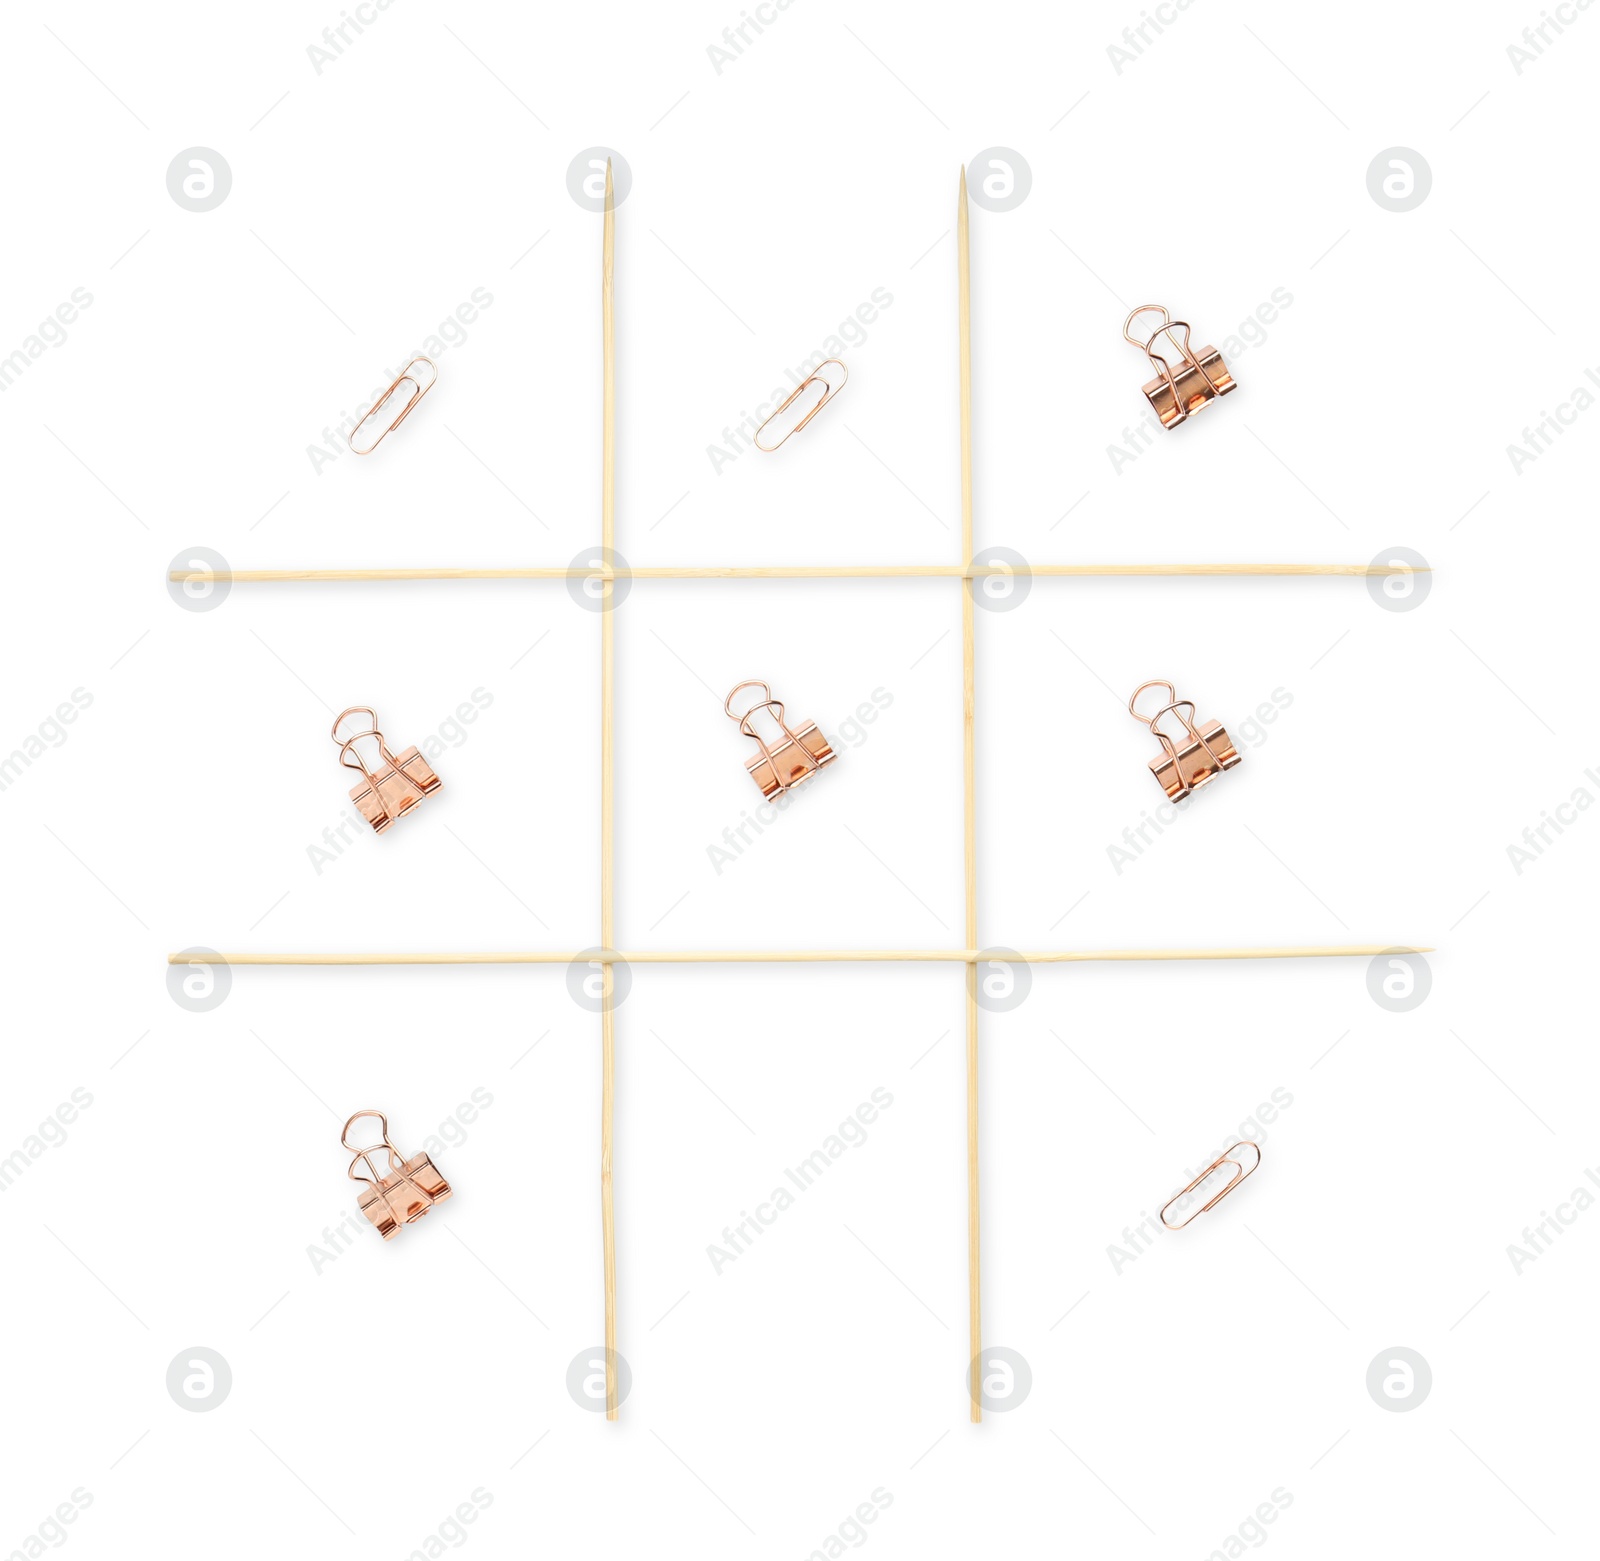 Photo of Tic tac toe game made with paper clips isolated on white, top view